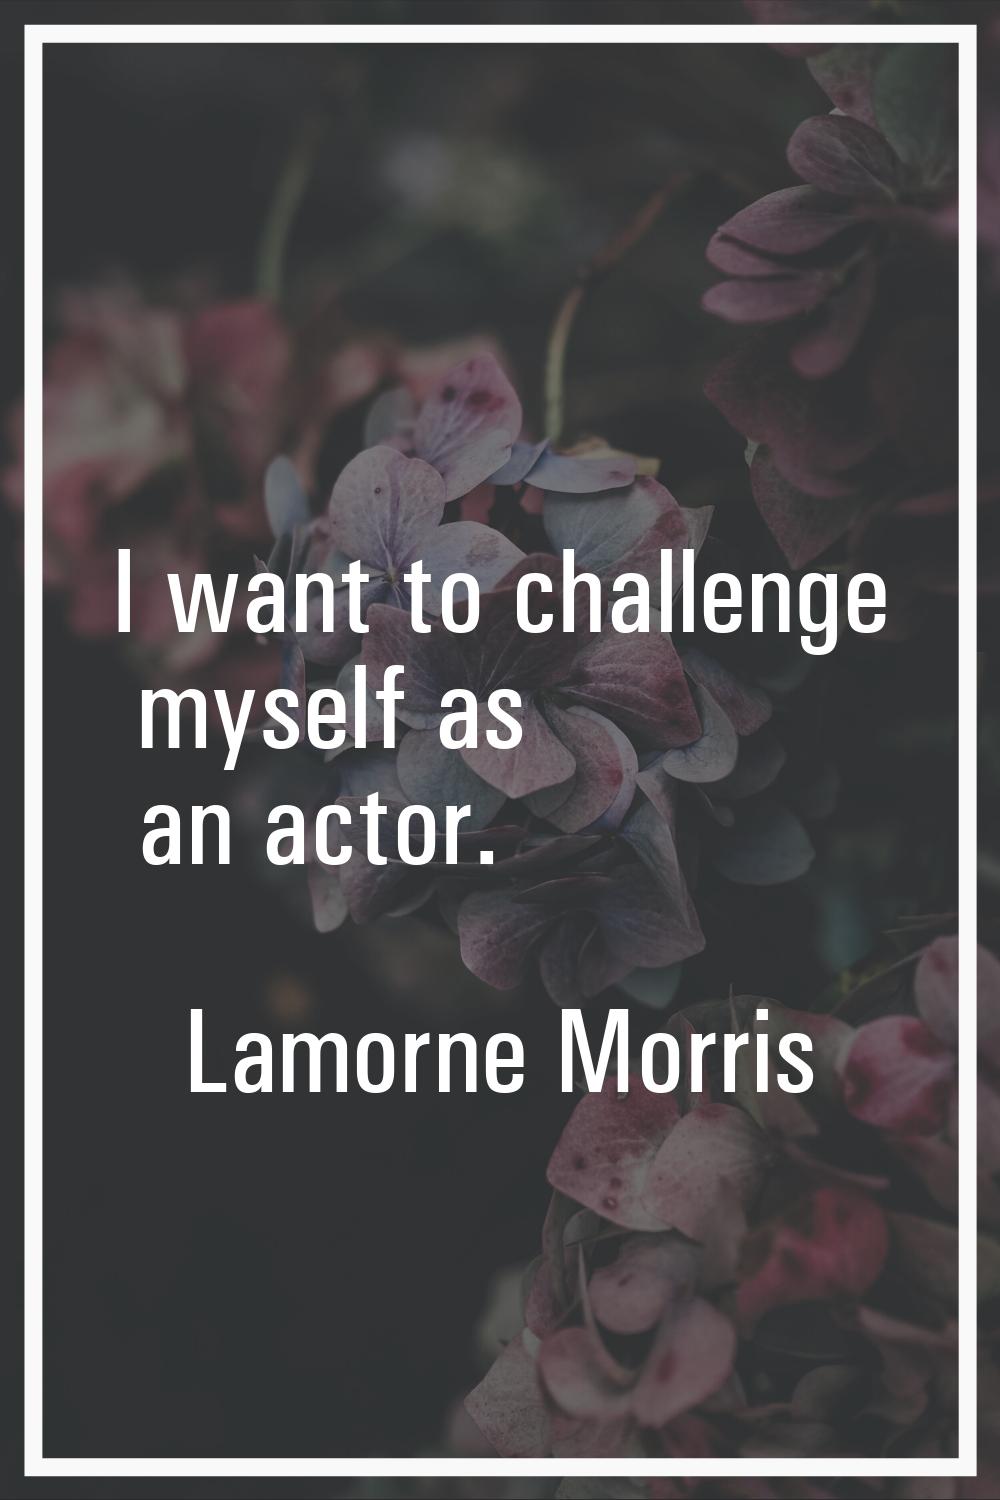 I want to challenge myself as an actor.